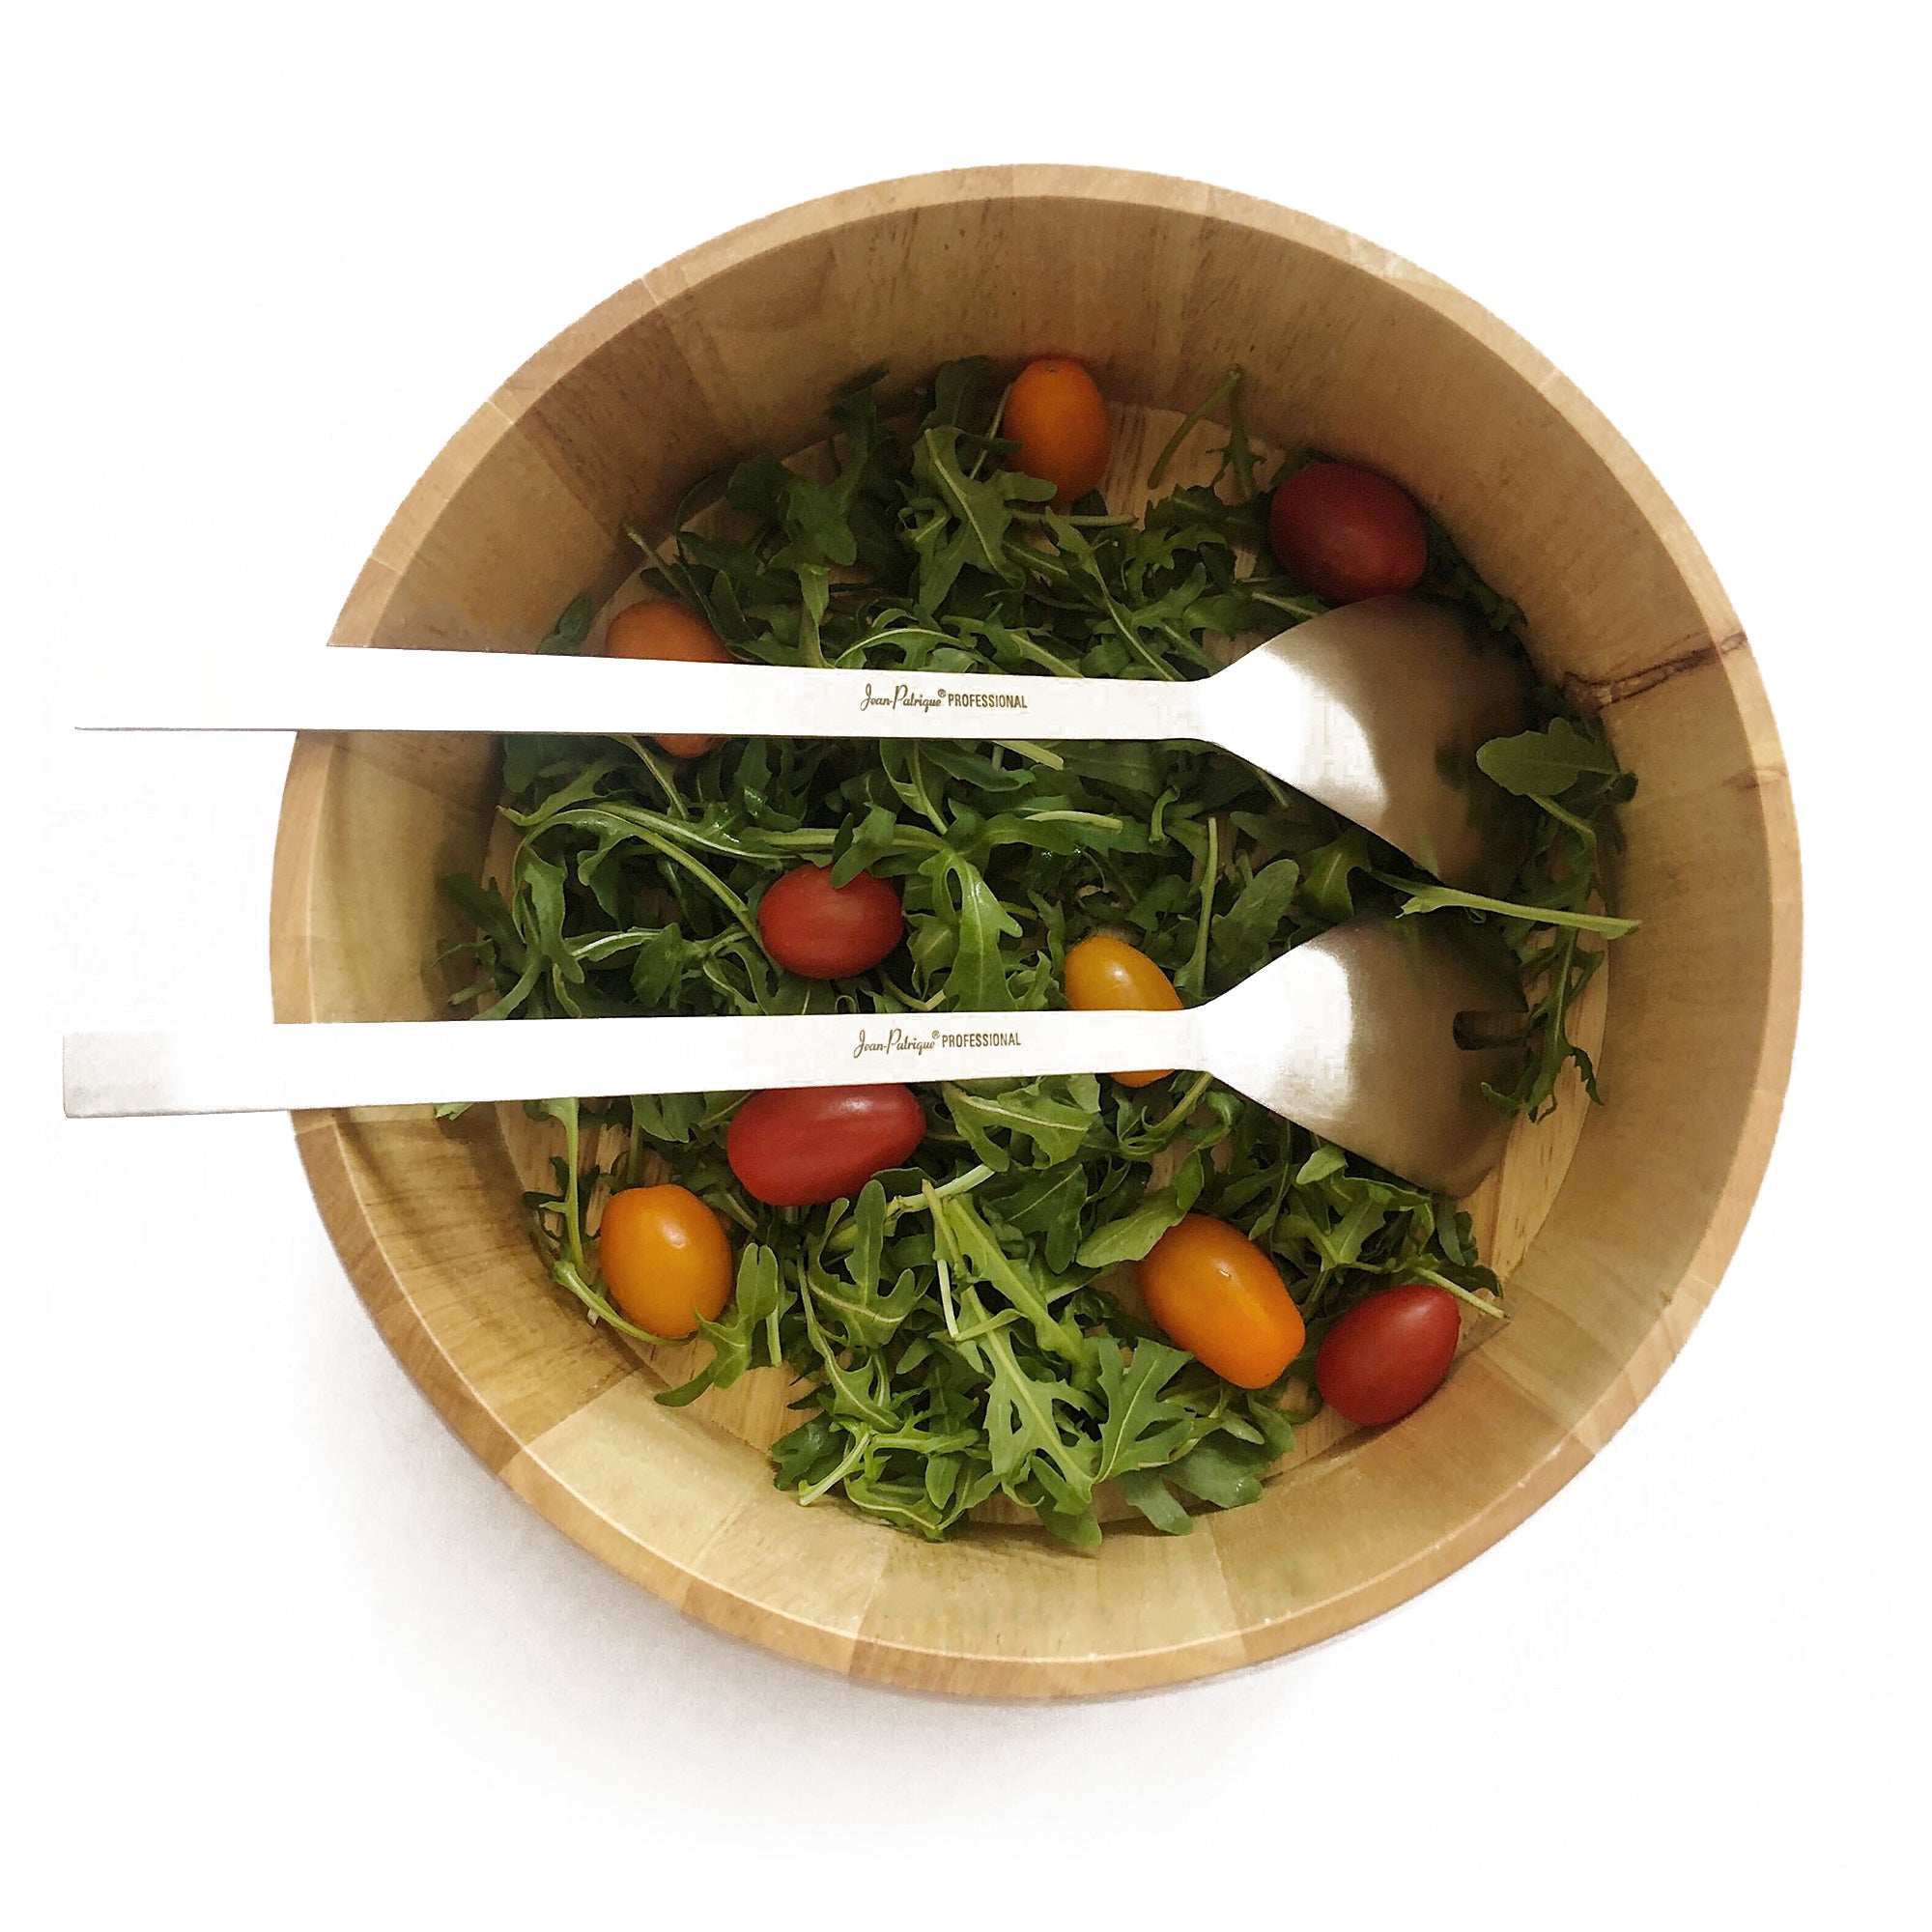 Salad Bowl & Stainless Steel Salad Servers - by Jean Patrique